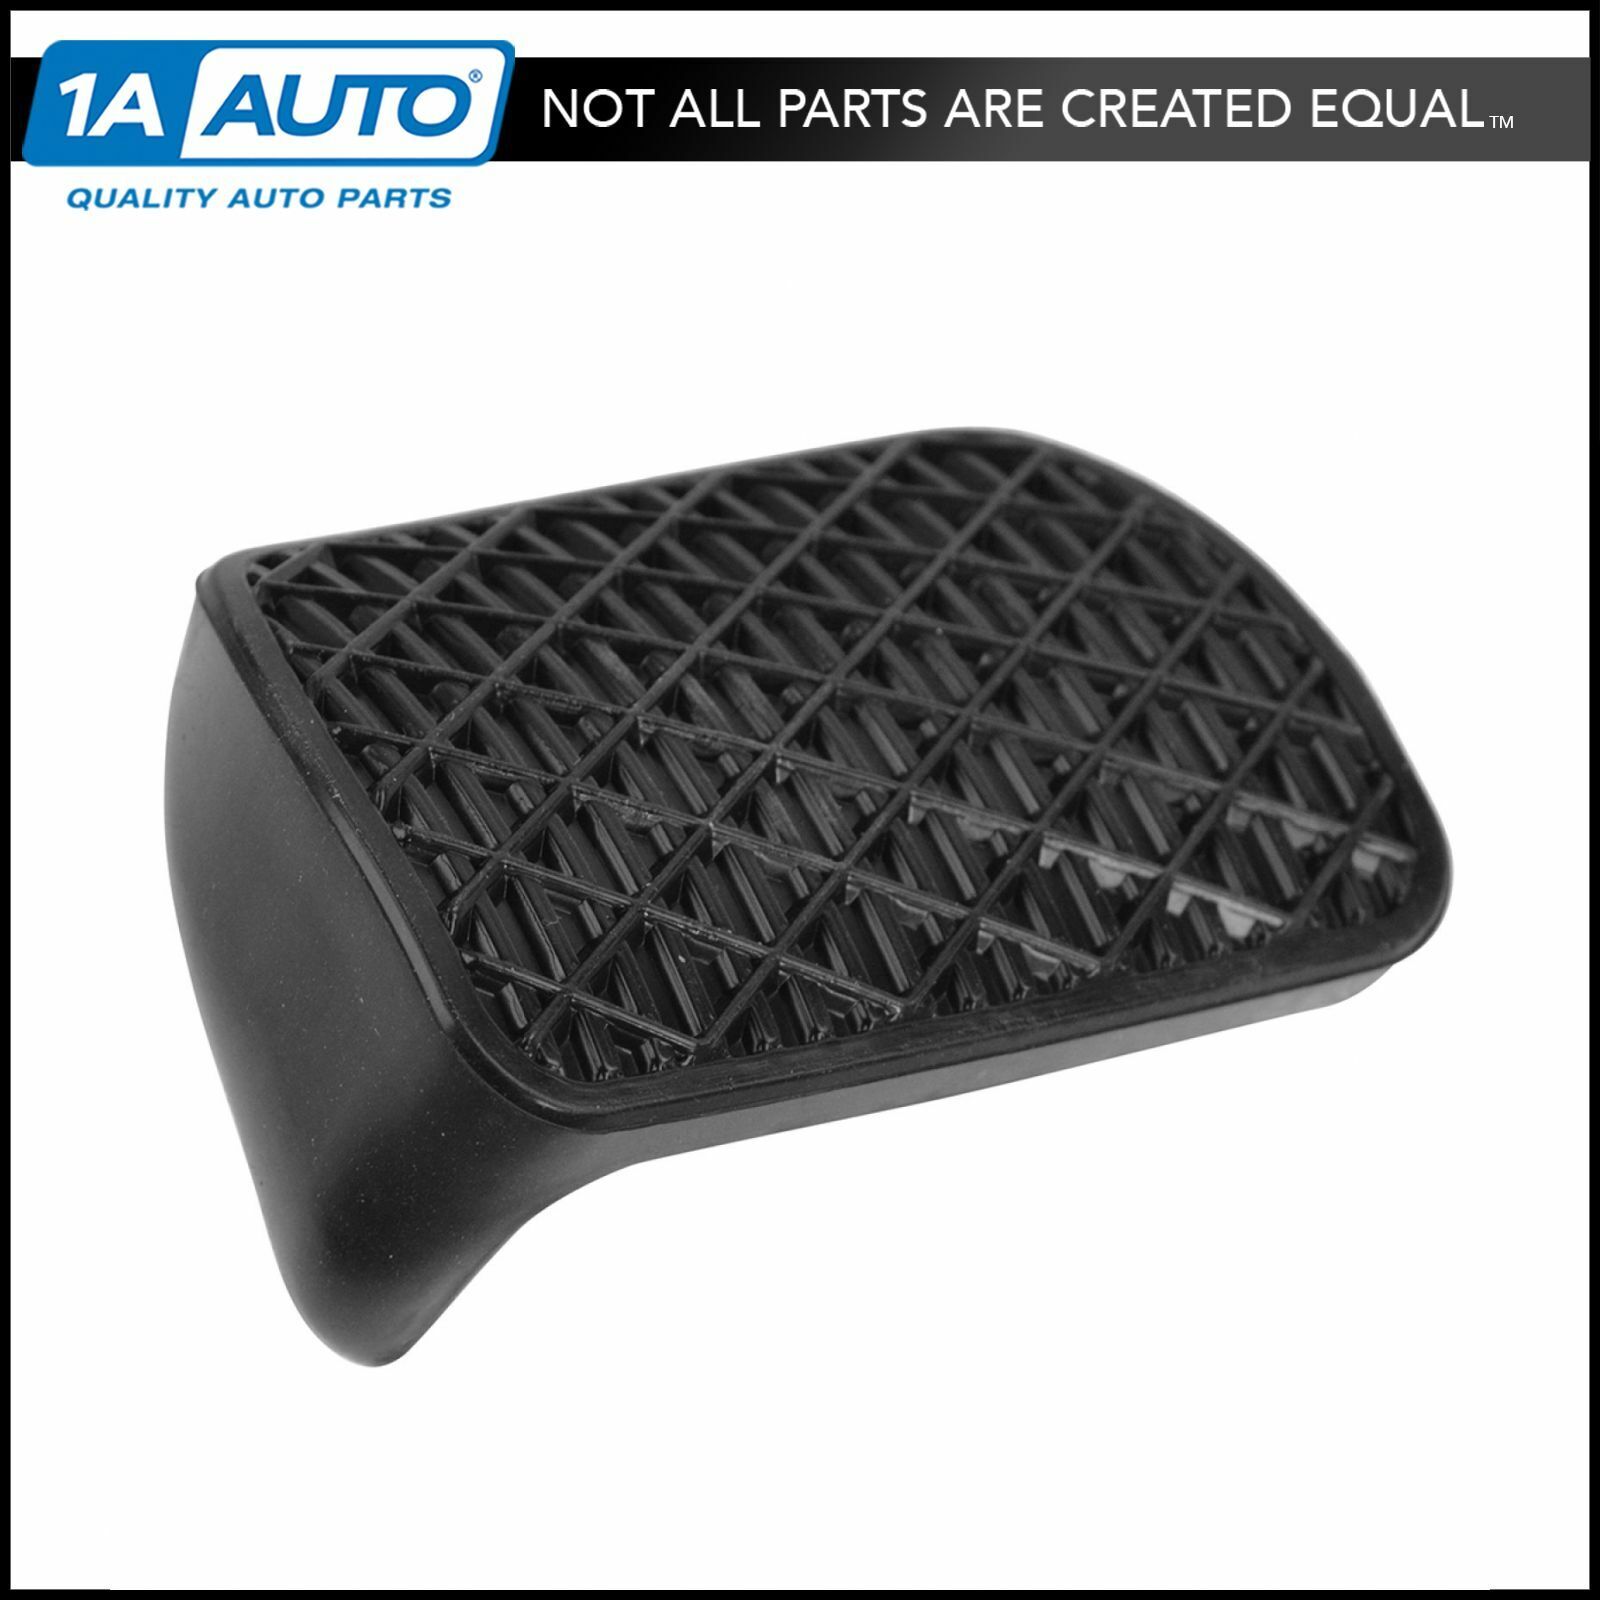 OEM Rubber Brake Pedal Pad for Auto Transmission Mercedes Benz 1232910082 New